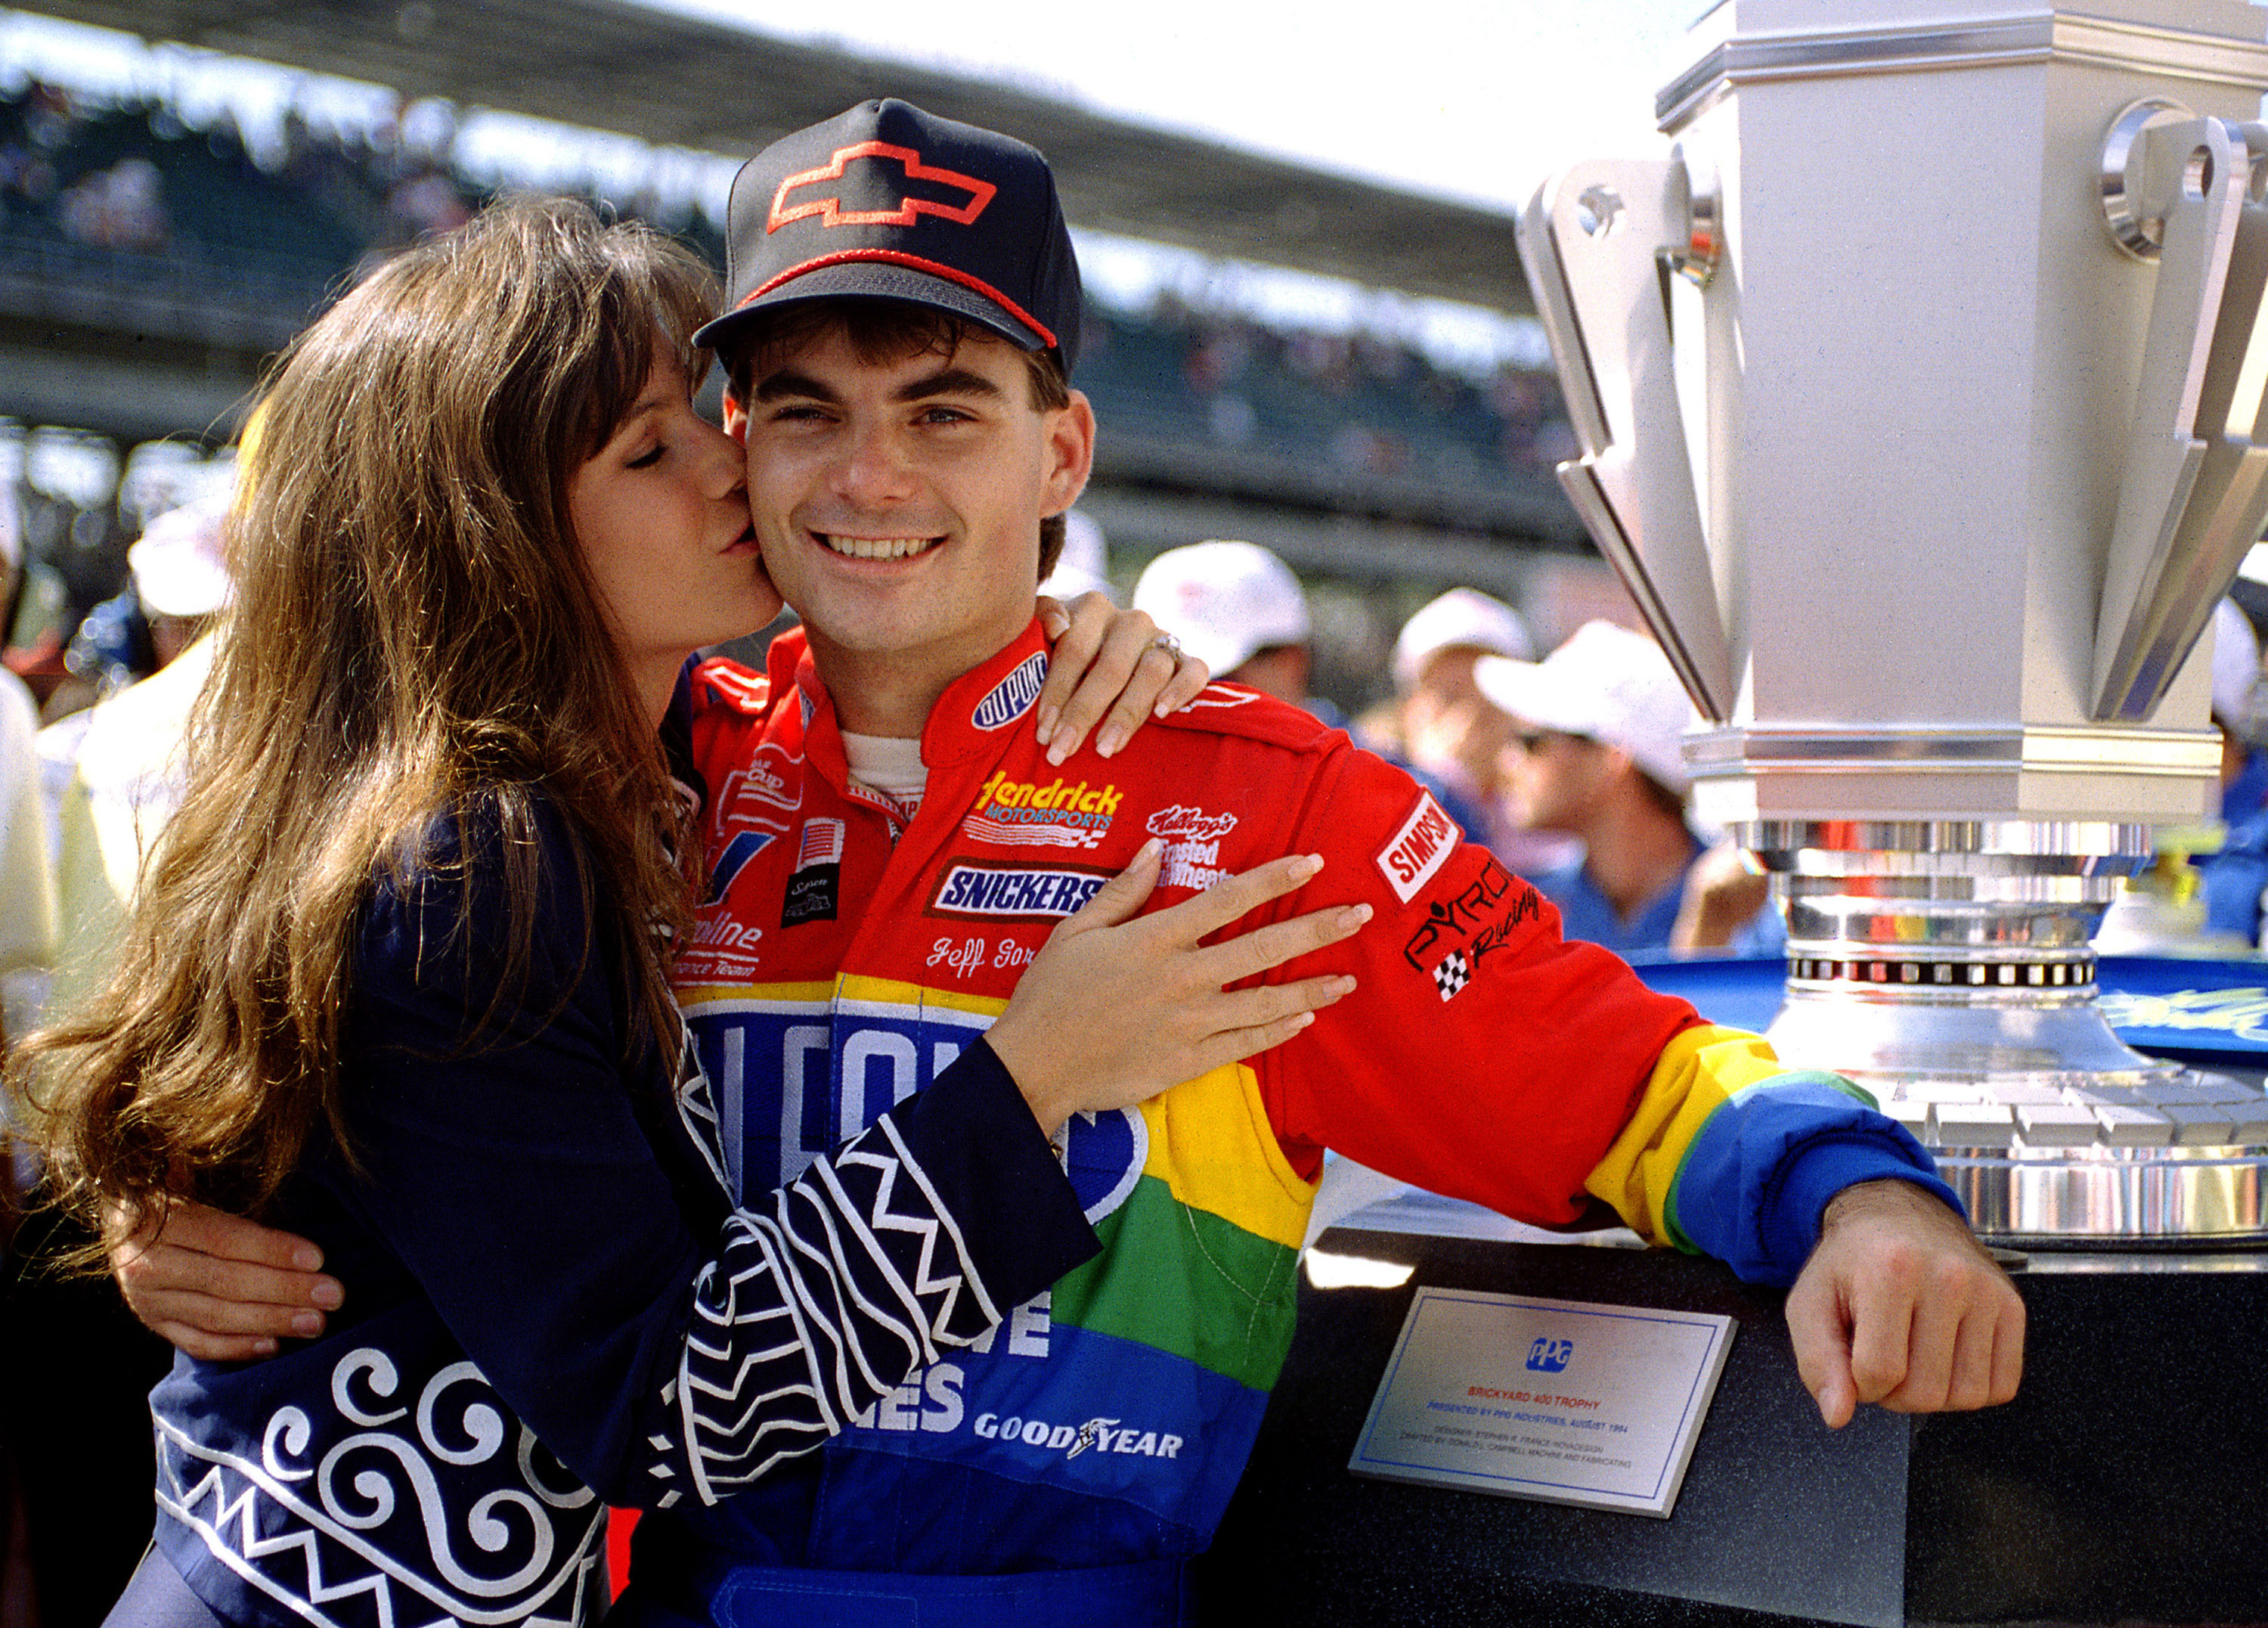 Brooke Sealey giving  Jeff Gordon a congratulatory kiss after winning the inaugural Brickyard 400 NASCAR race on August 6, 1994, in Indianapolis, Indiana. | Source: Getty Images